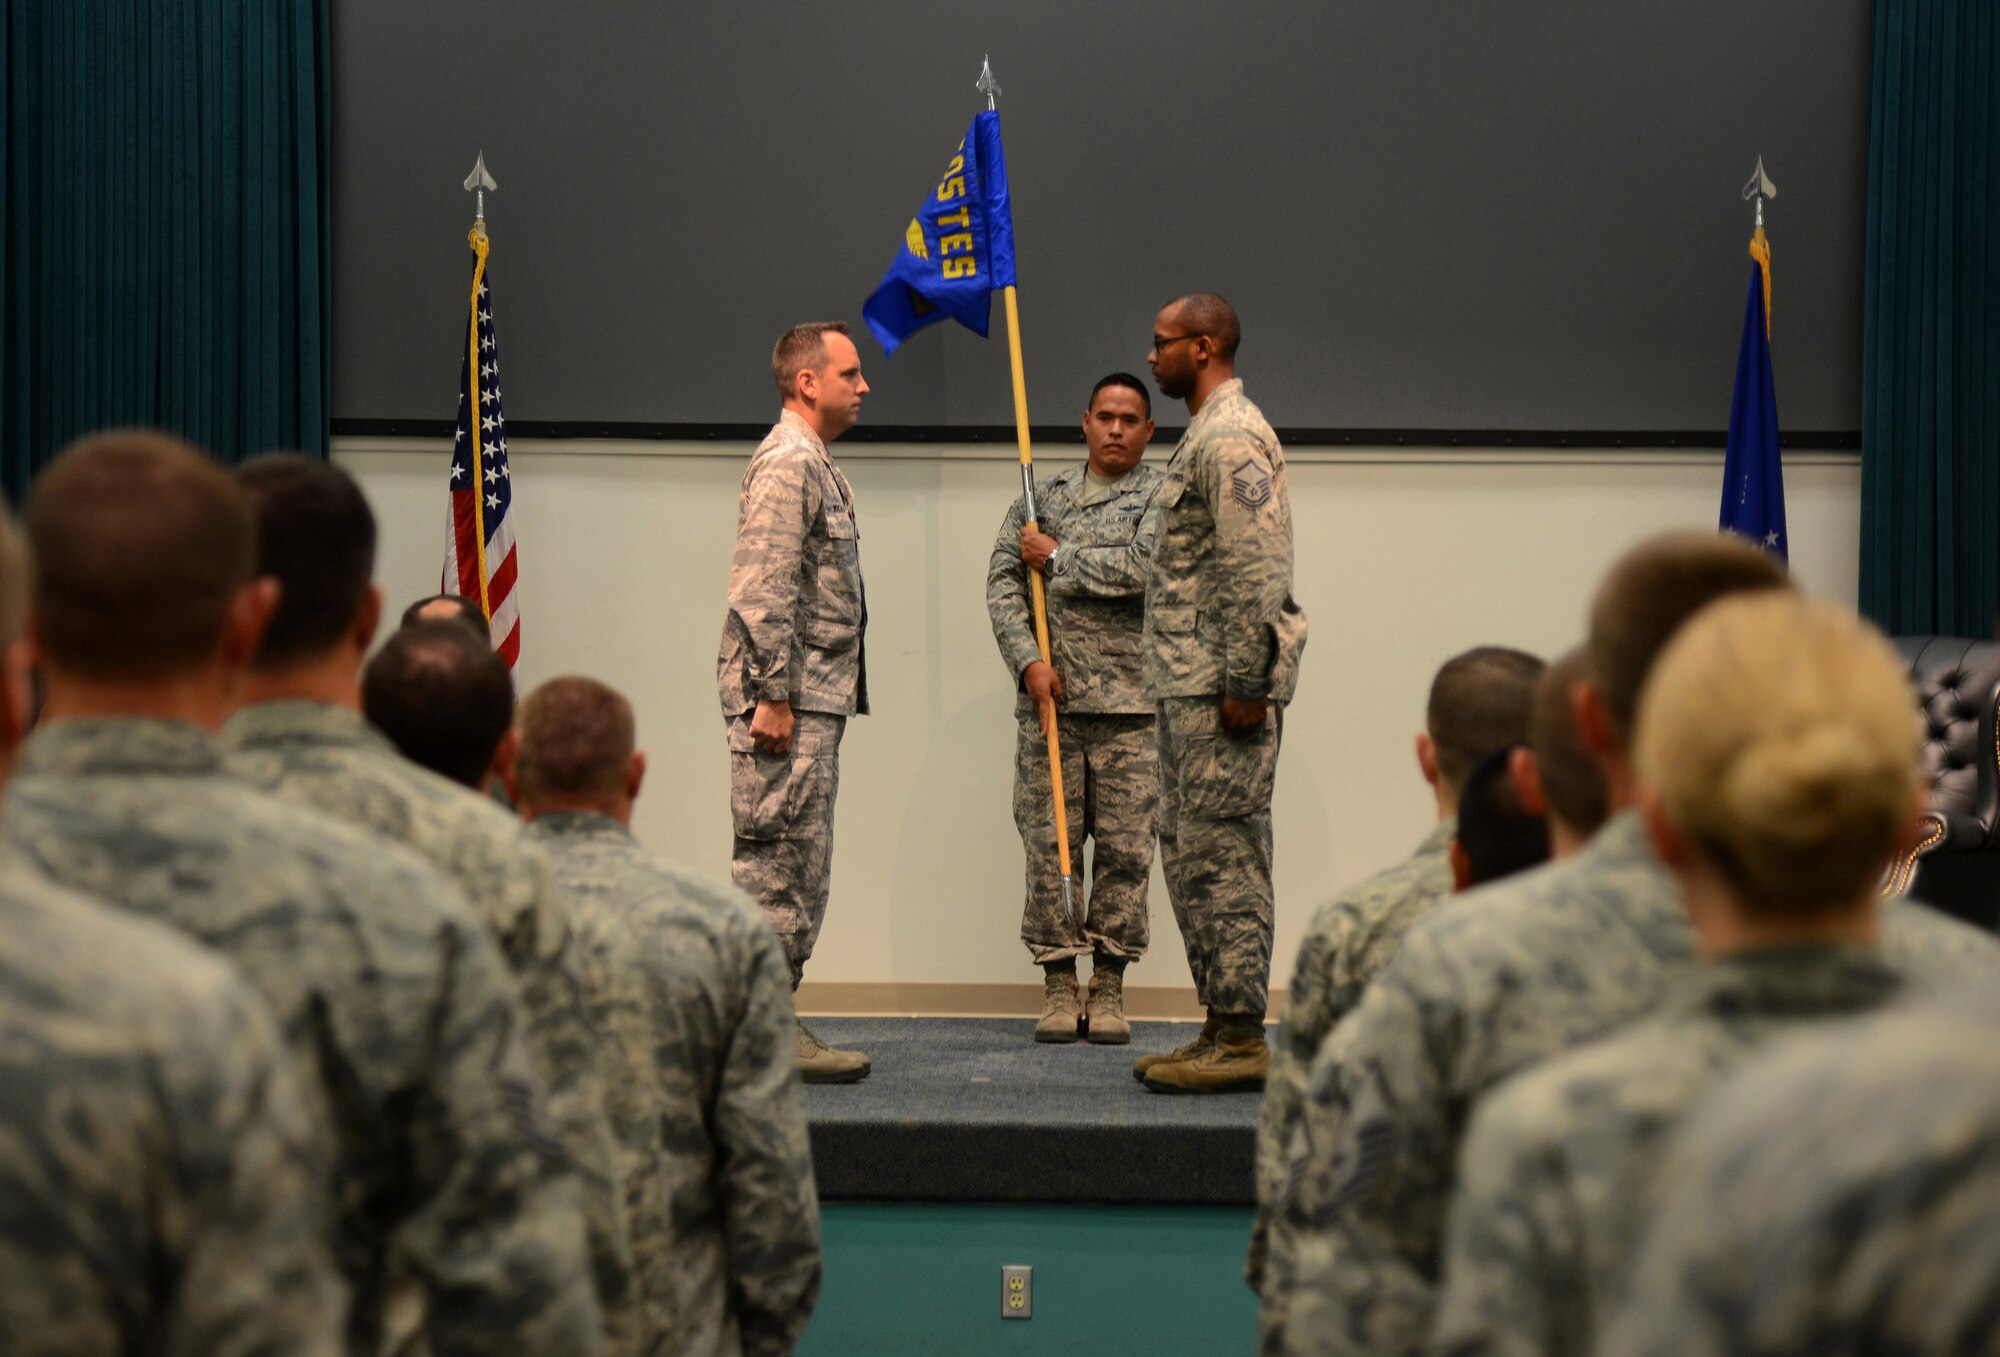 The guidon for the 605th Test and Evaluation Squadron, Detachment 1, is officially unfurled during a Flag Uncasing Ceremony in Fannin Hall Aug. 7.